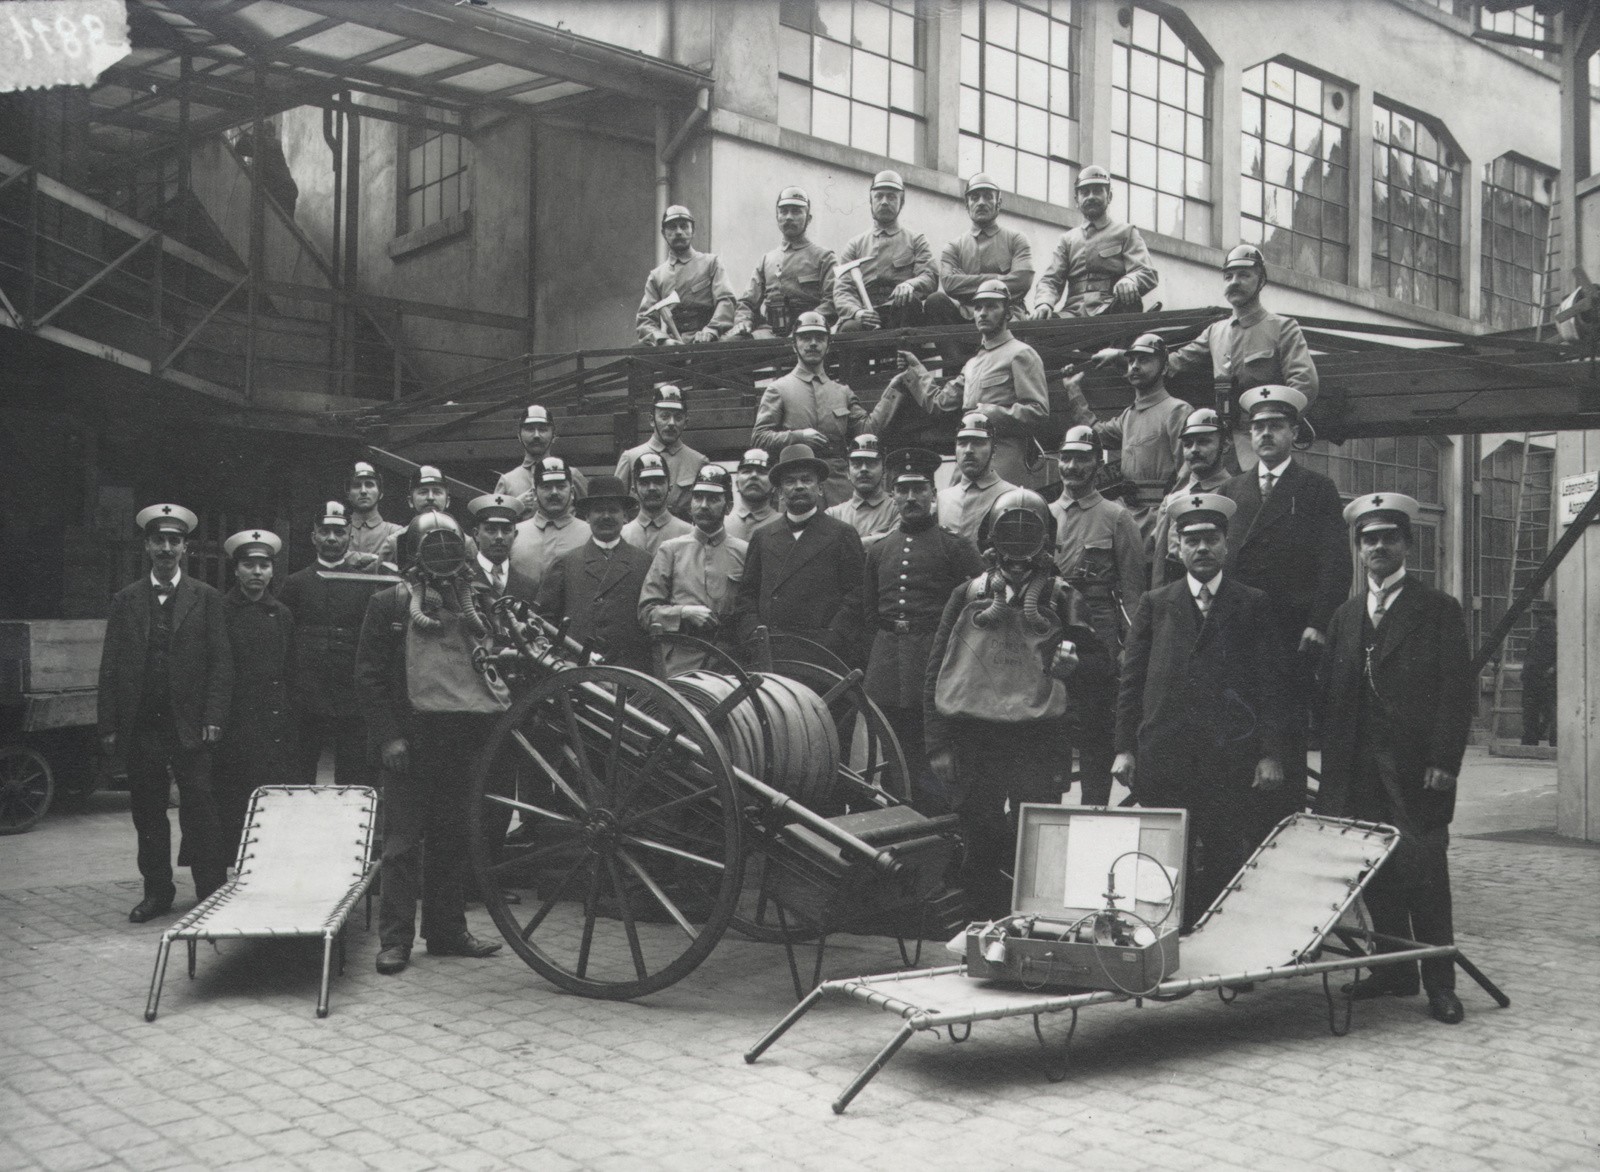 100 years of the Bosch plant fire service